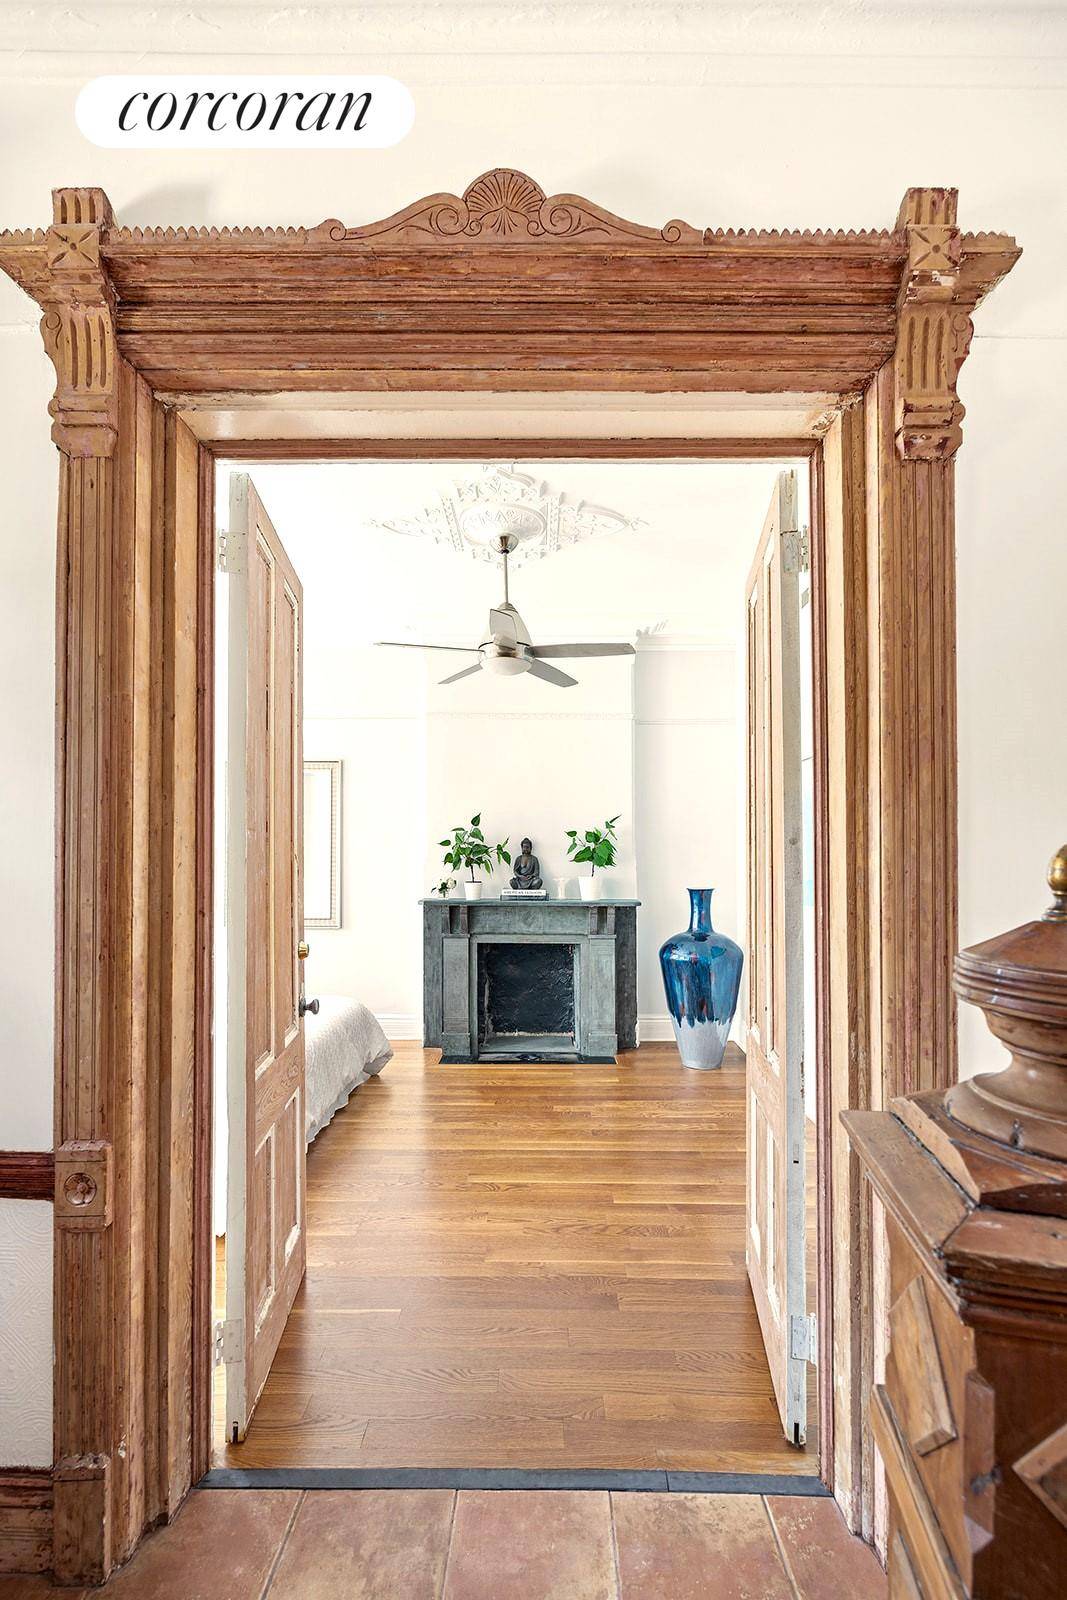 WELCOME TO 585 HANCOCK ! This beautiful home has been stunningly renovated with all of its turn of the century details thoughtfully preserved, including artisan plaster and woodwork, handsome decorative ...